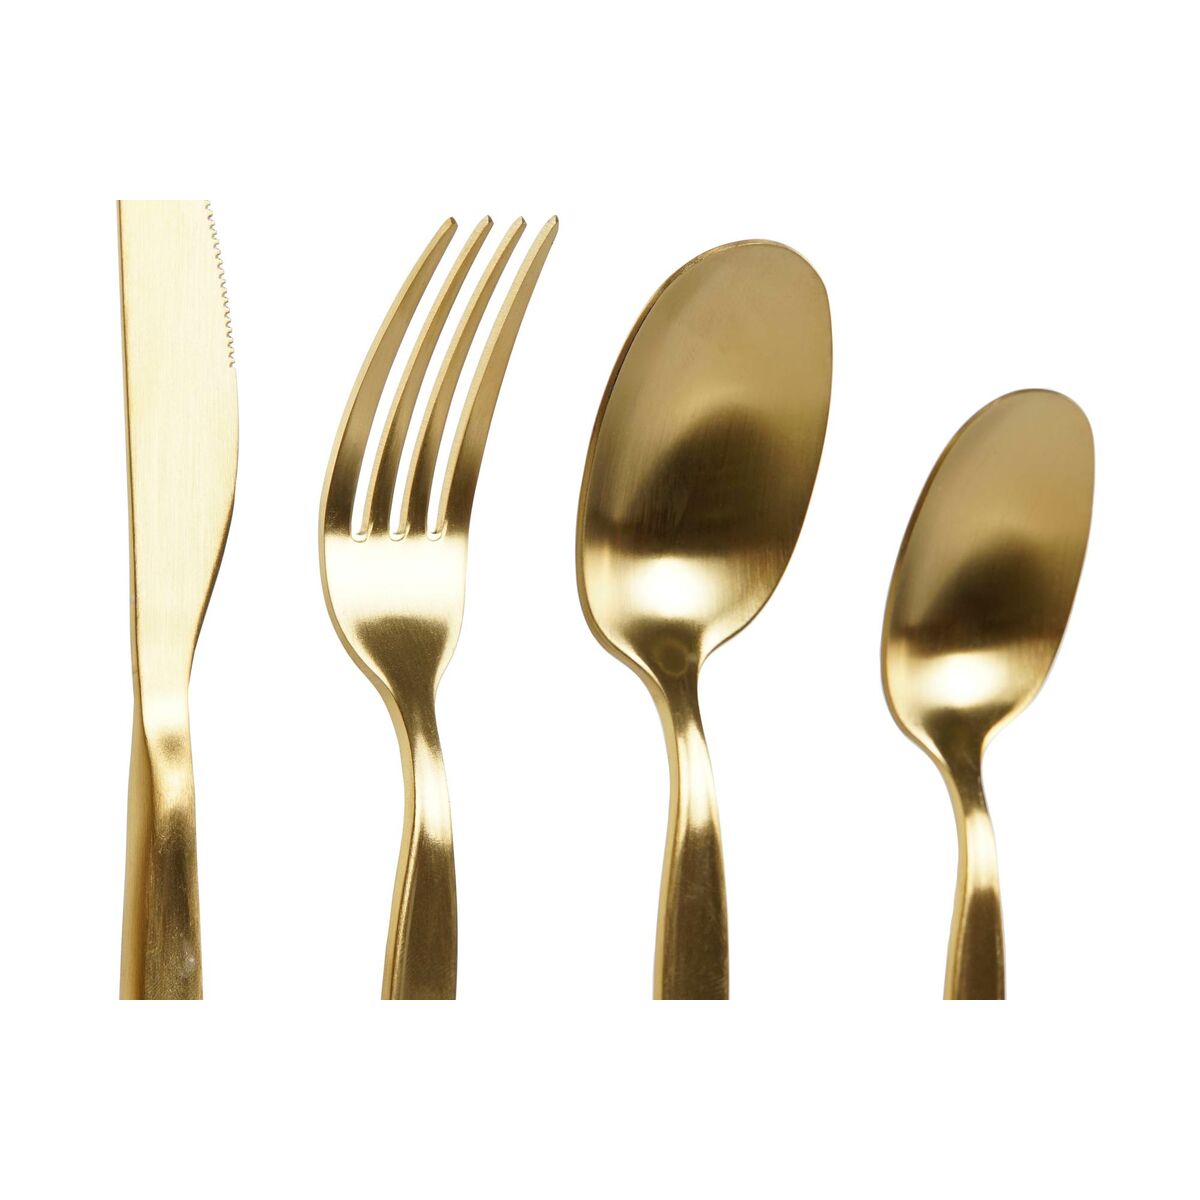 Cutlery DKD Home Decor Golden Stainless steel 2 x 0,5 x 22 cm 24 Pieces